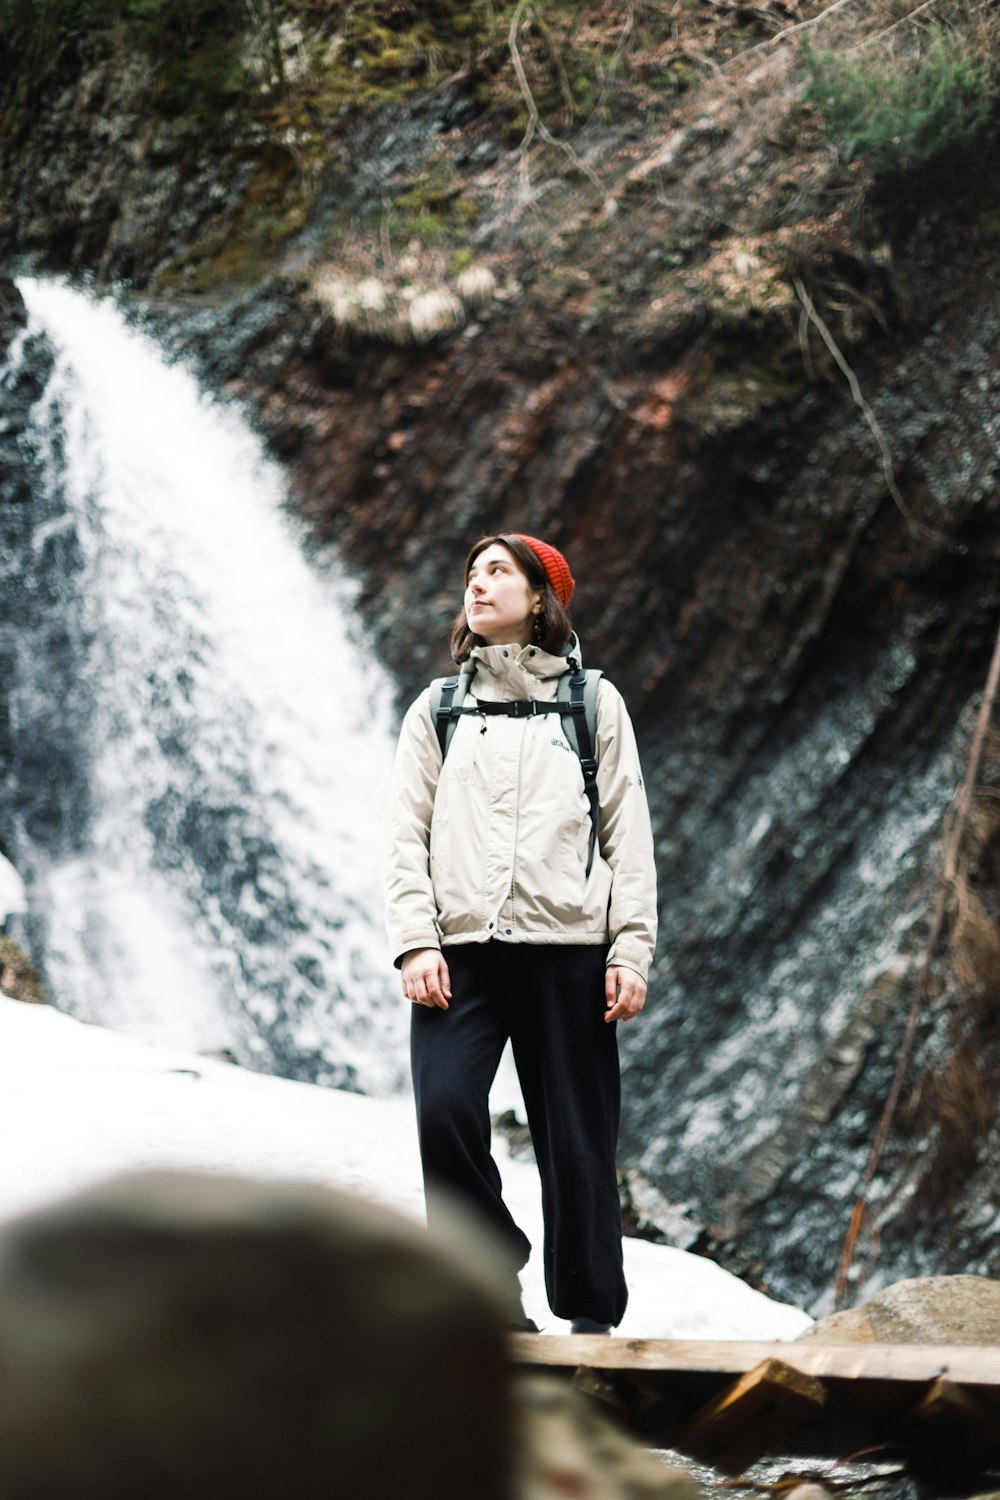 woman in gray jacket and black pants standing on rock formation near waterfalls during daytime